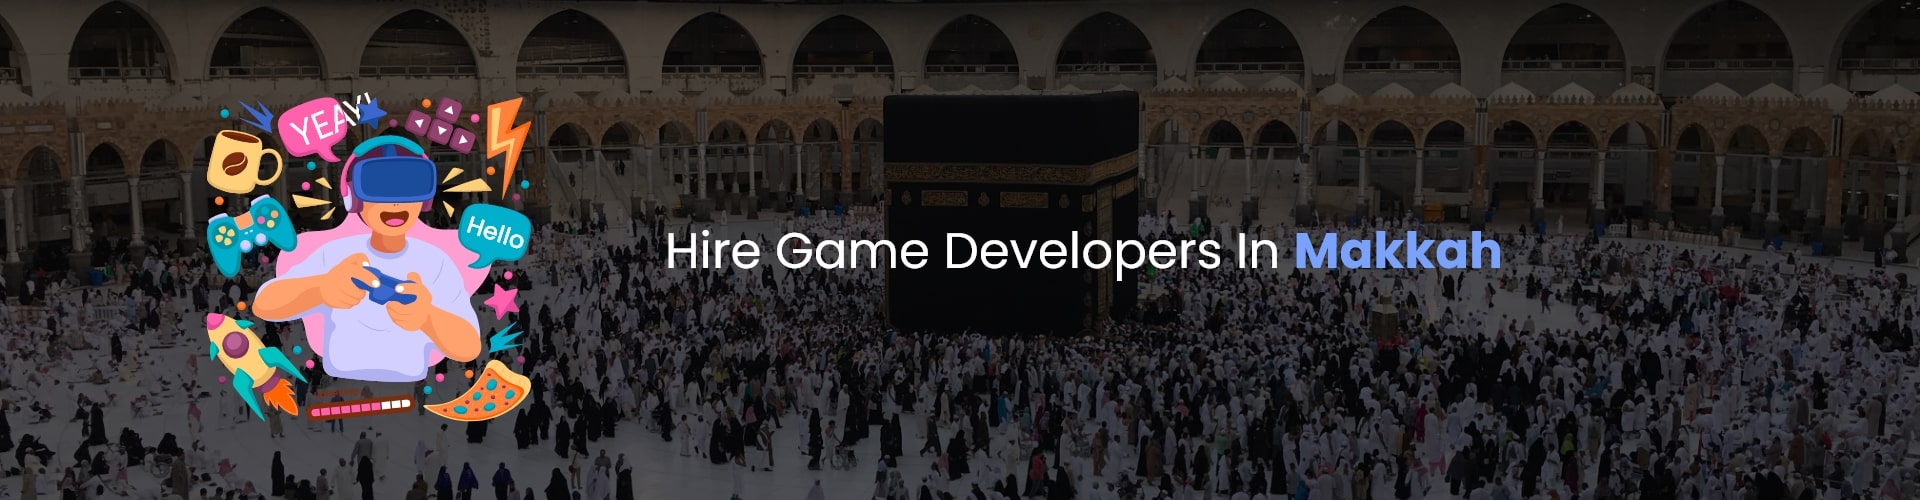 hire game developers in makkah